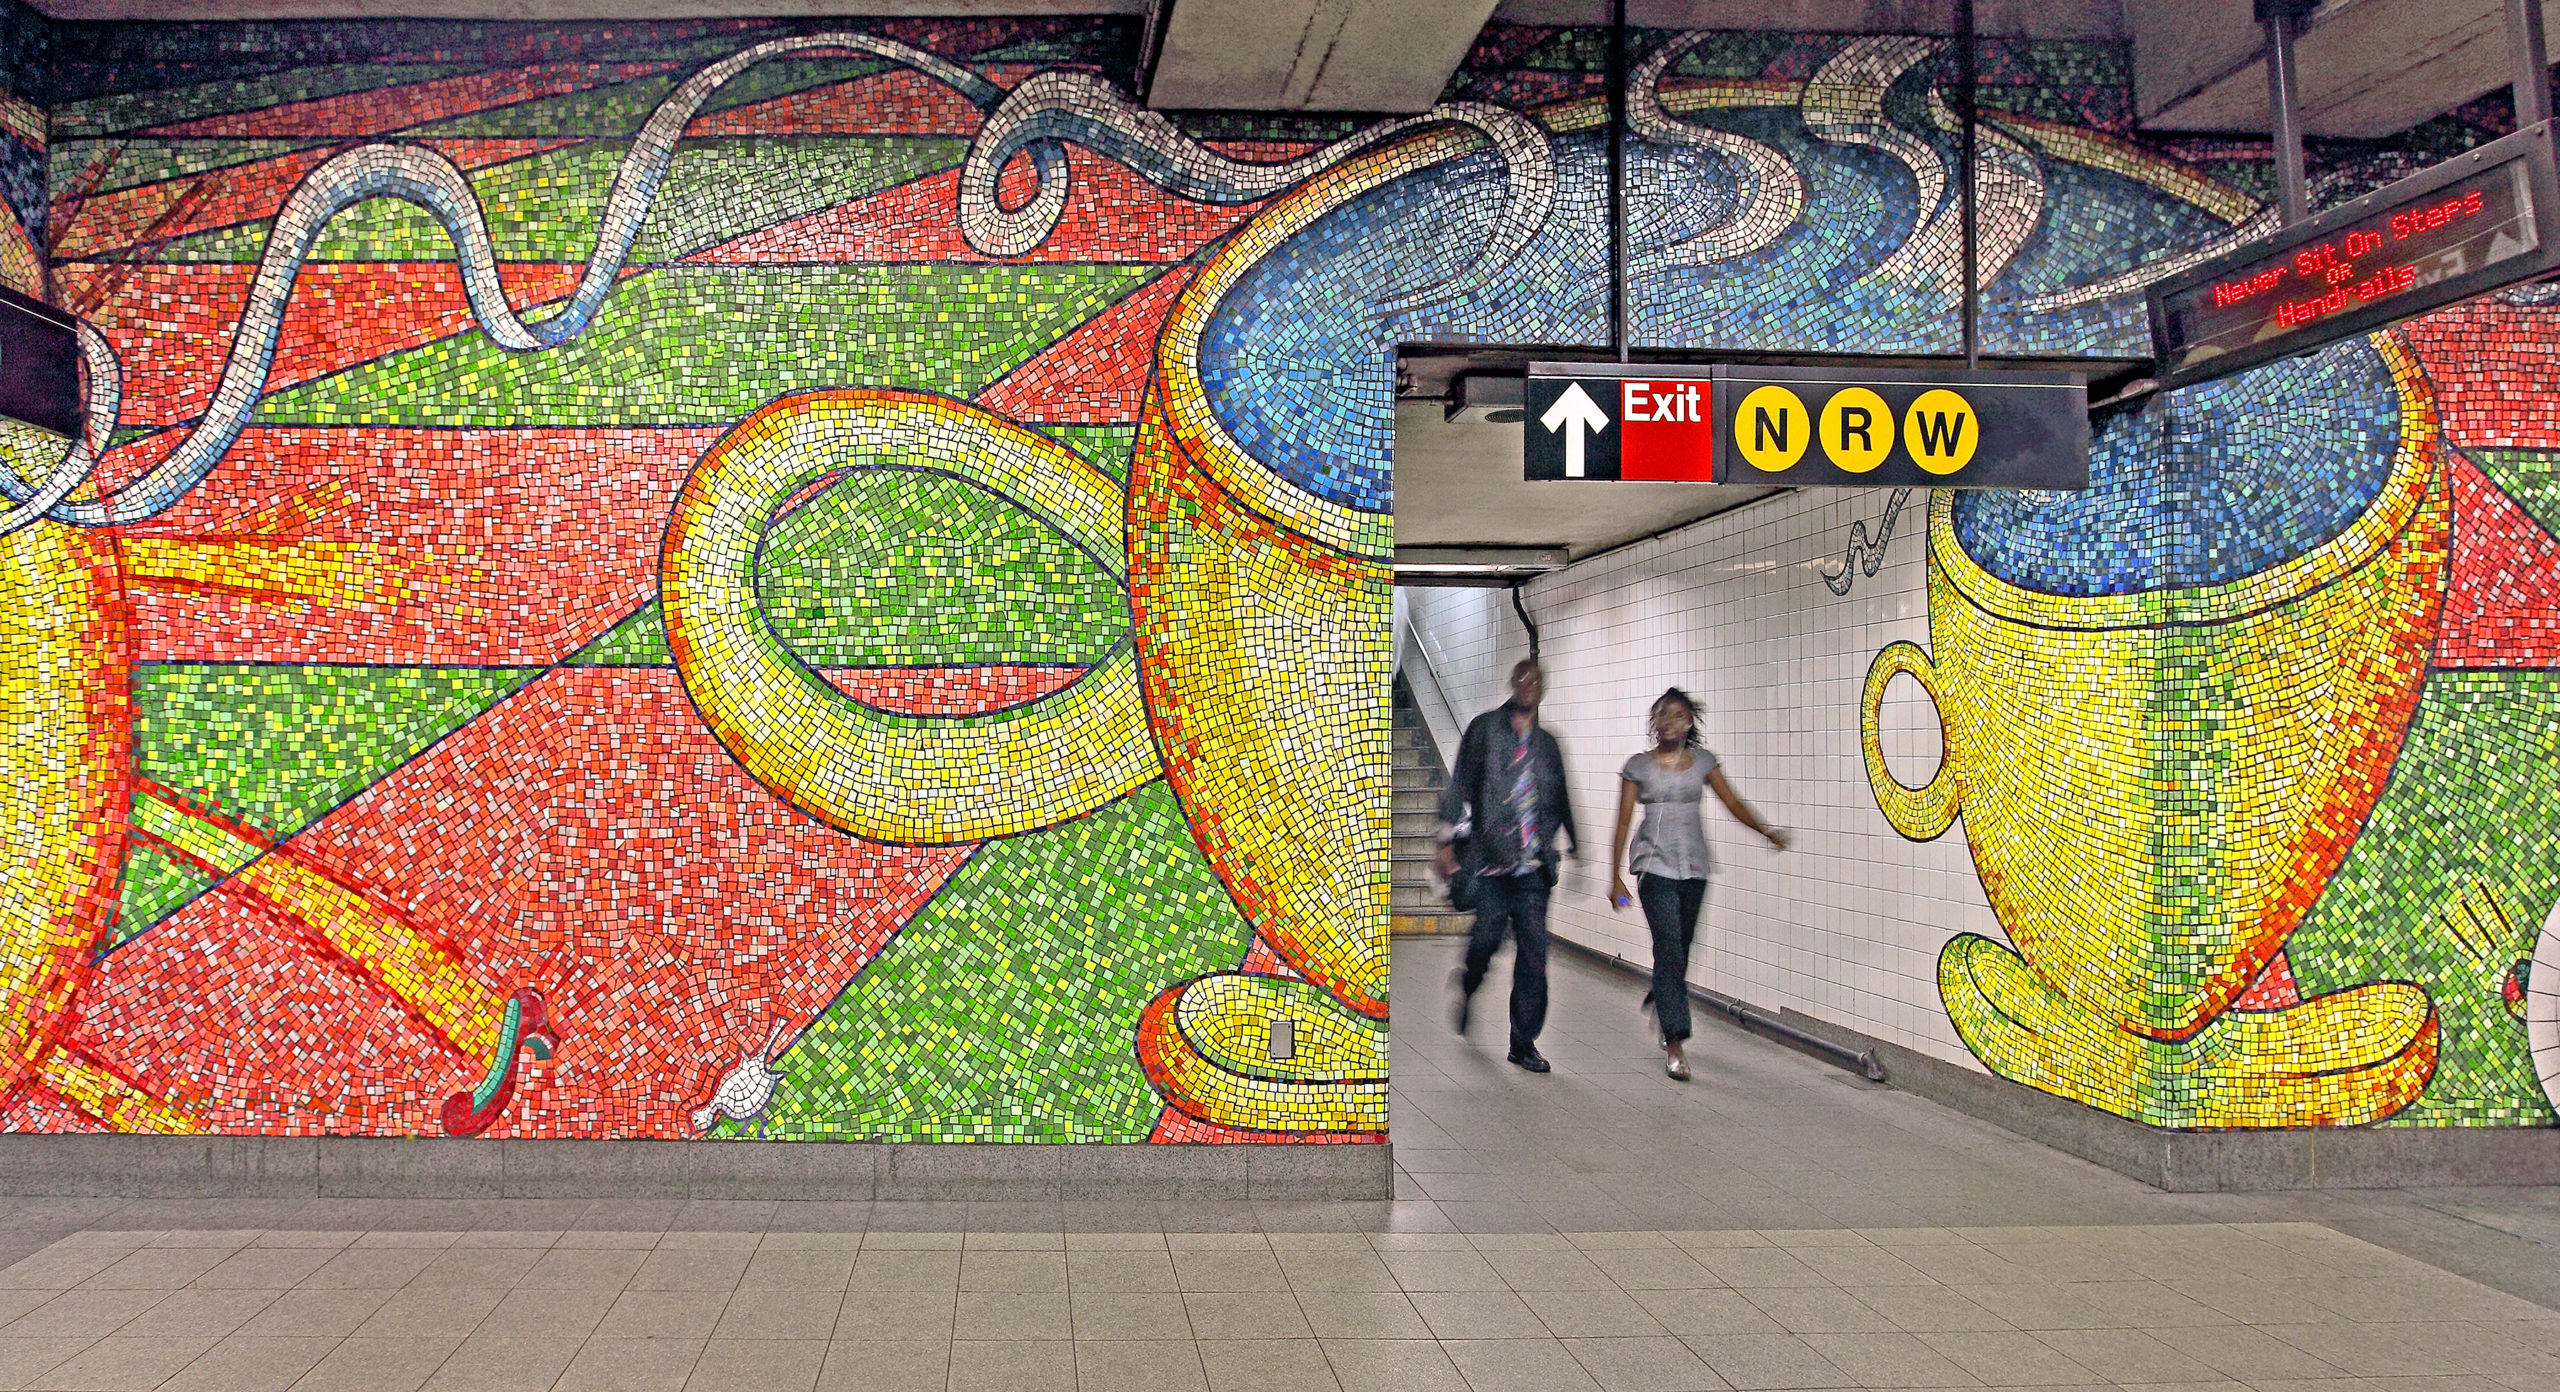 Glass Mosaic Mural by Elizabeth Murray at 59th St Subway Station. Title: "Blooming" 1996